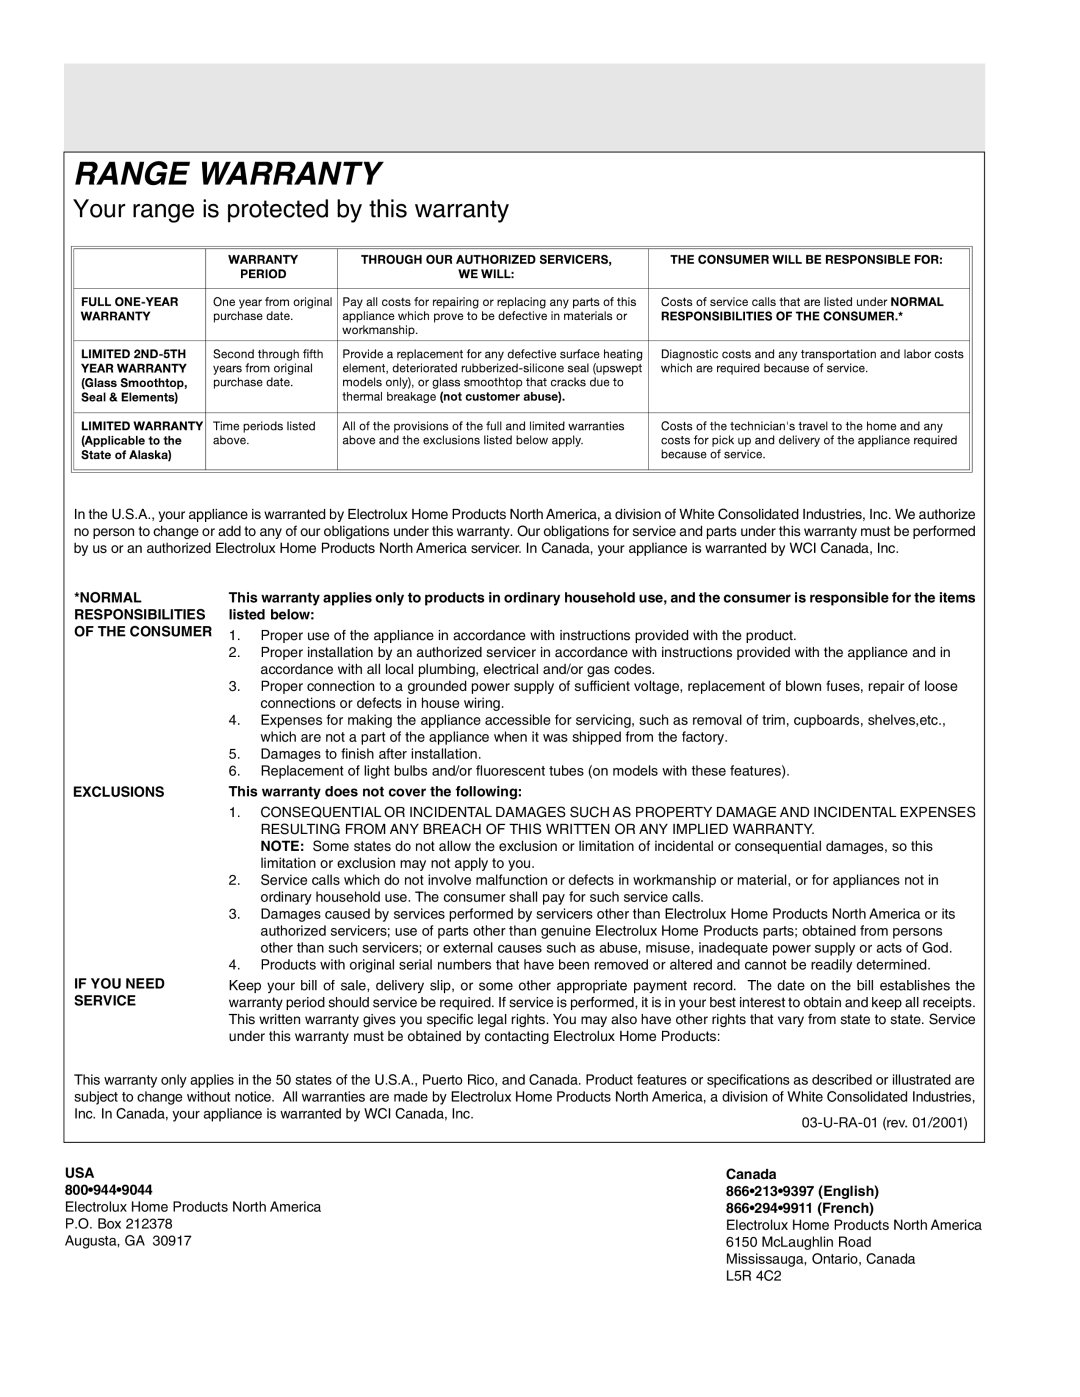 Frigidaire 316135921 important safety instructions Range Warranty, Your range is protected by this warranty, Service 